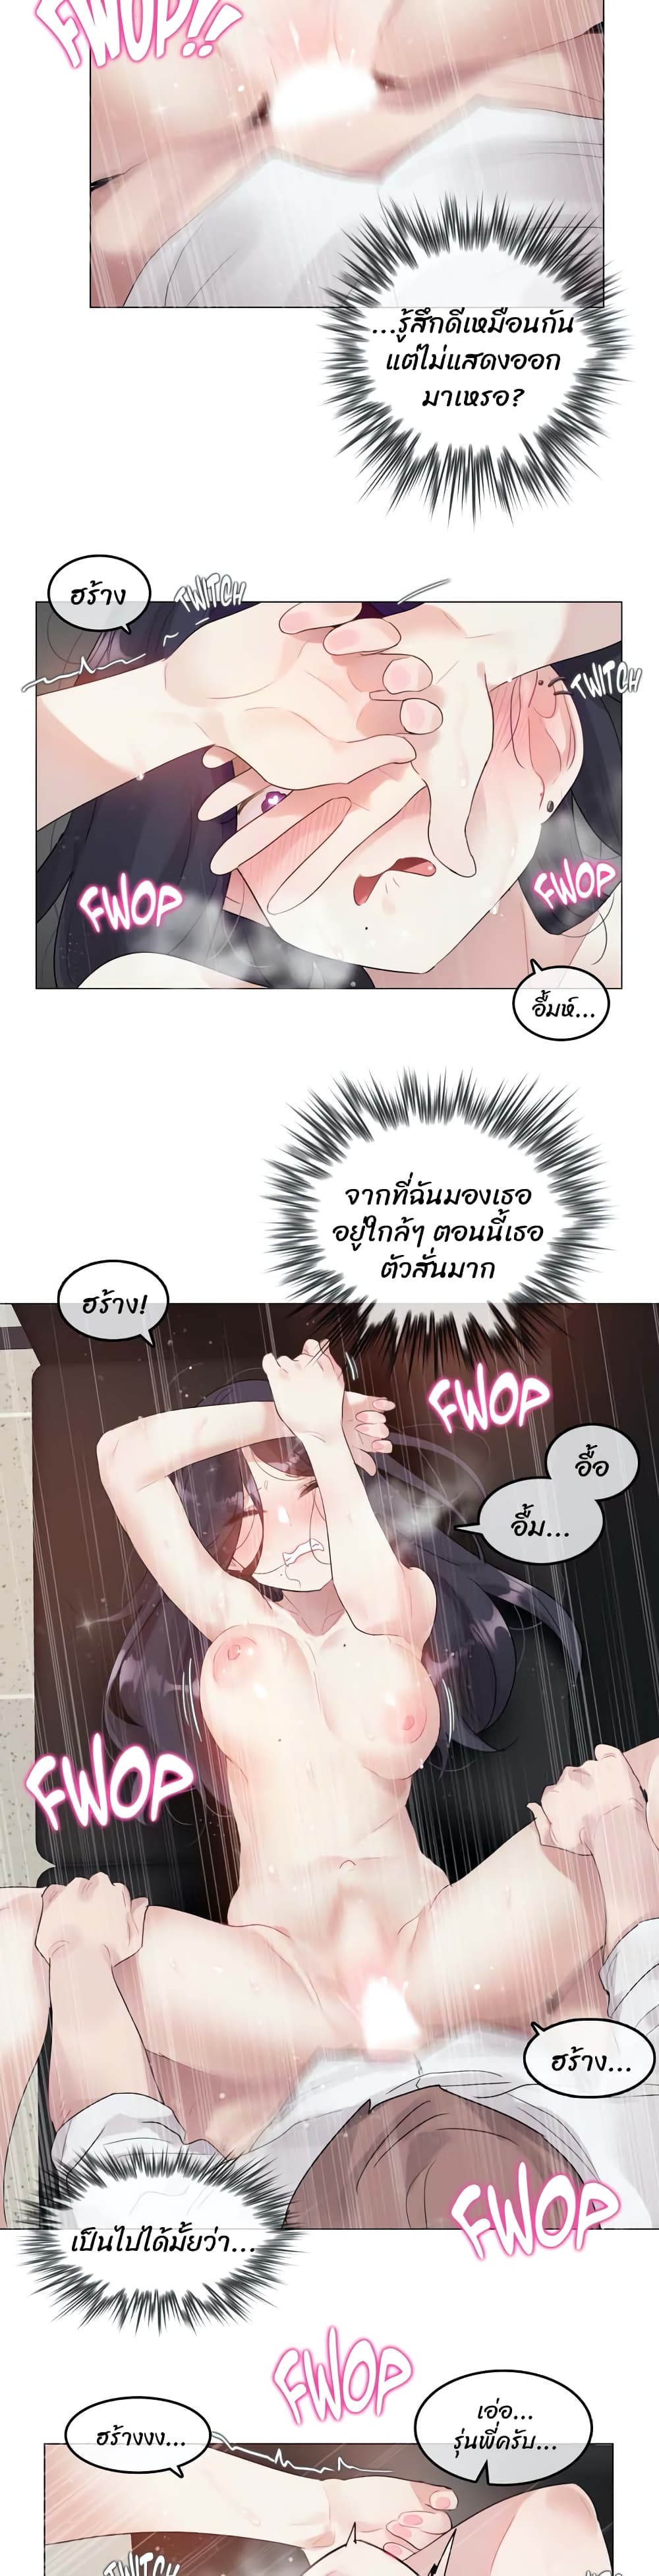 A Pervert's Daily Life 103-103